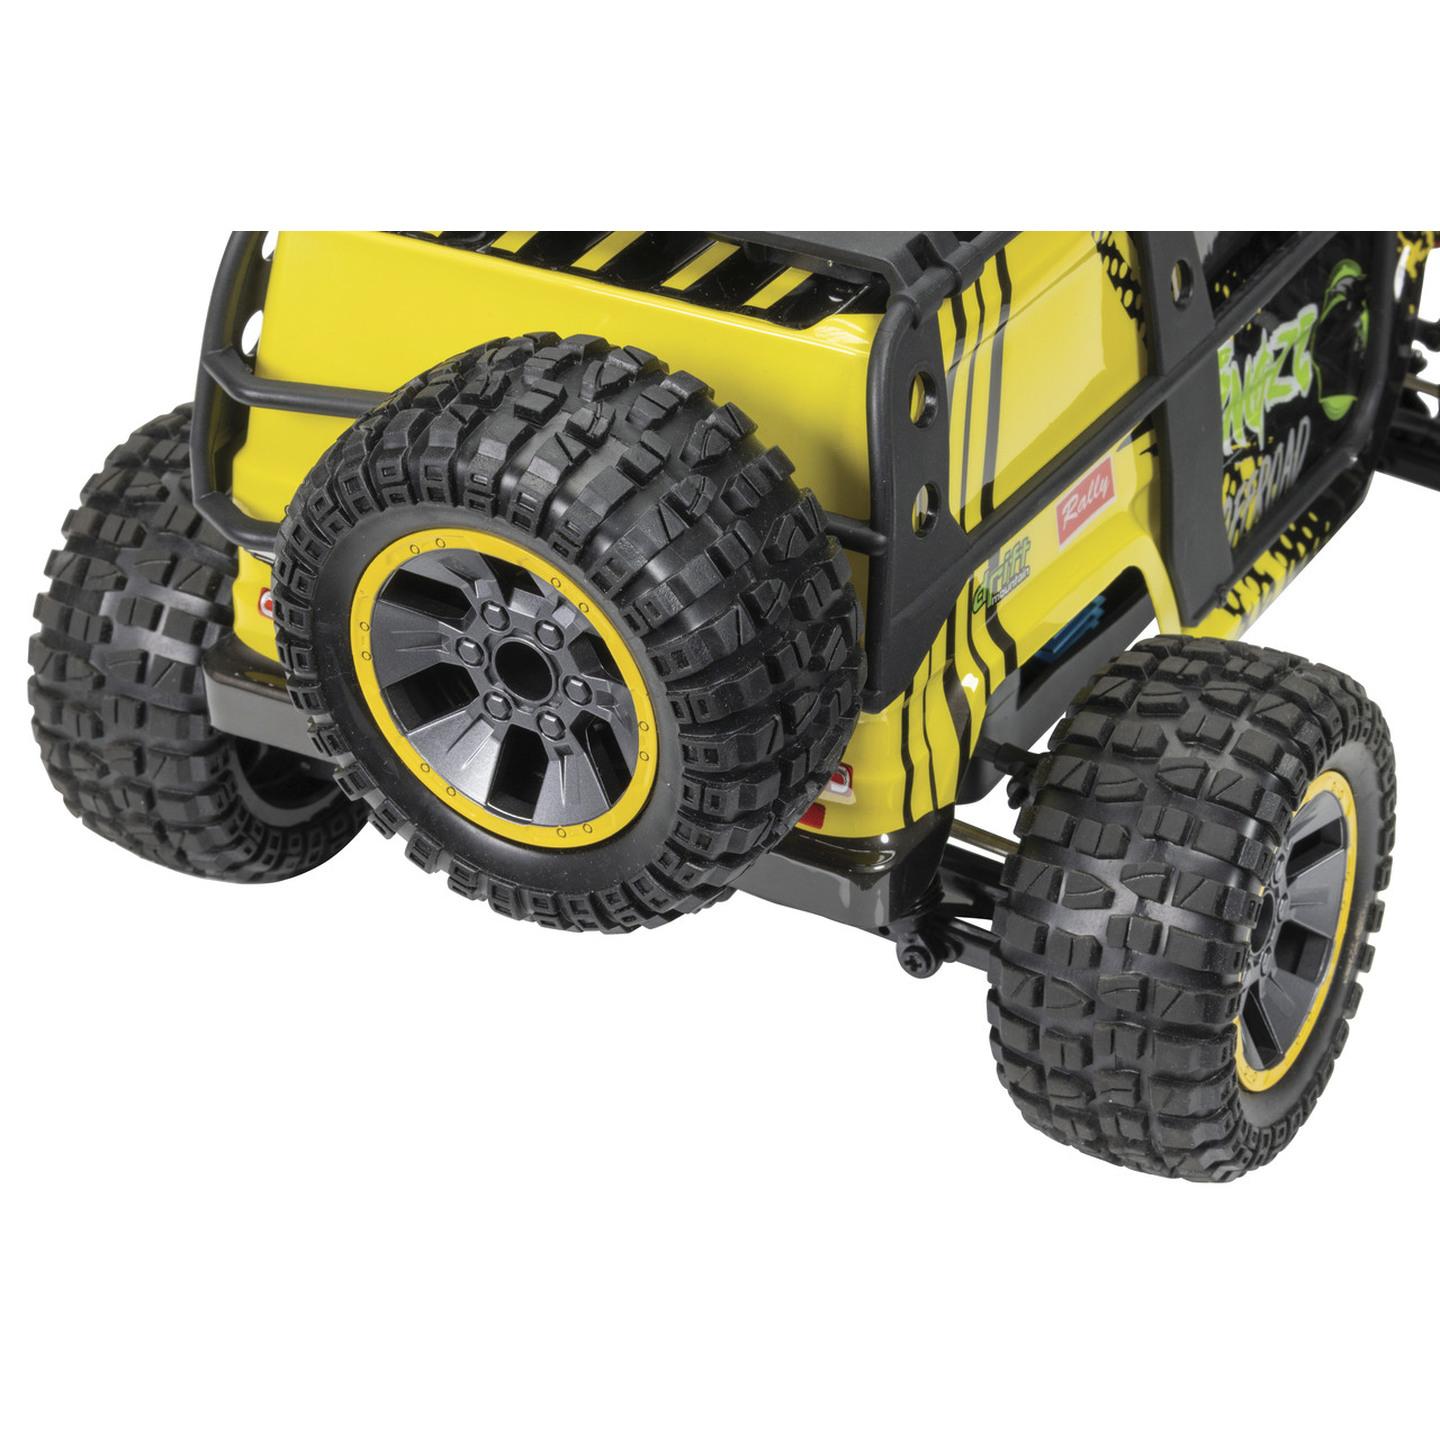 1:10 Scale High Speed R/C 4WD